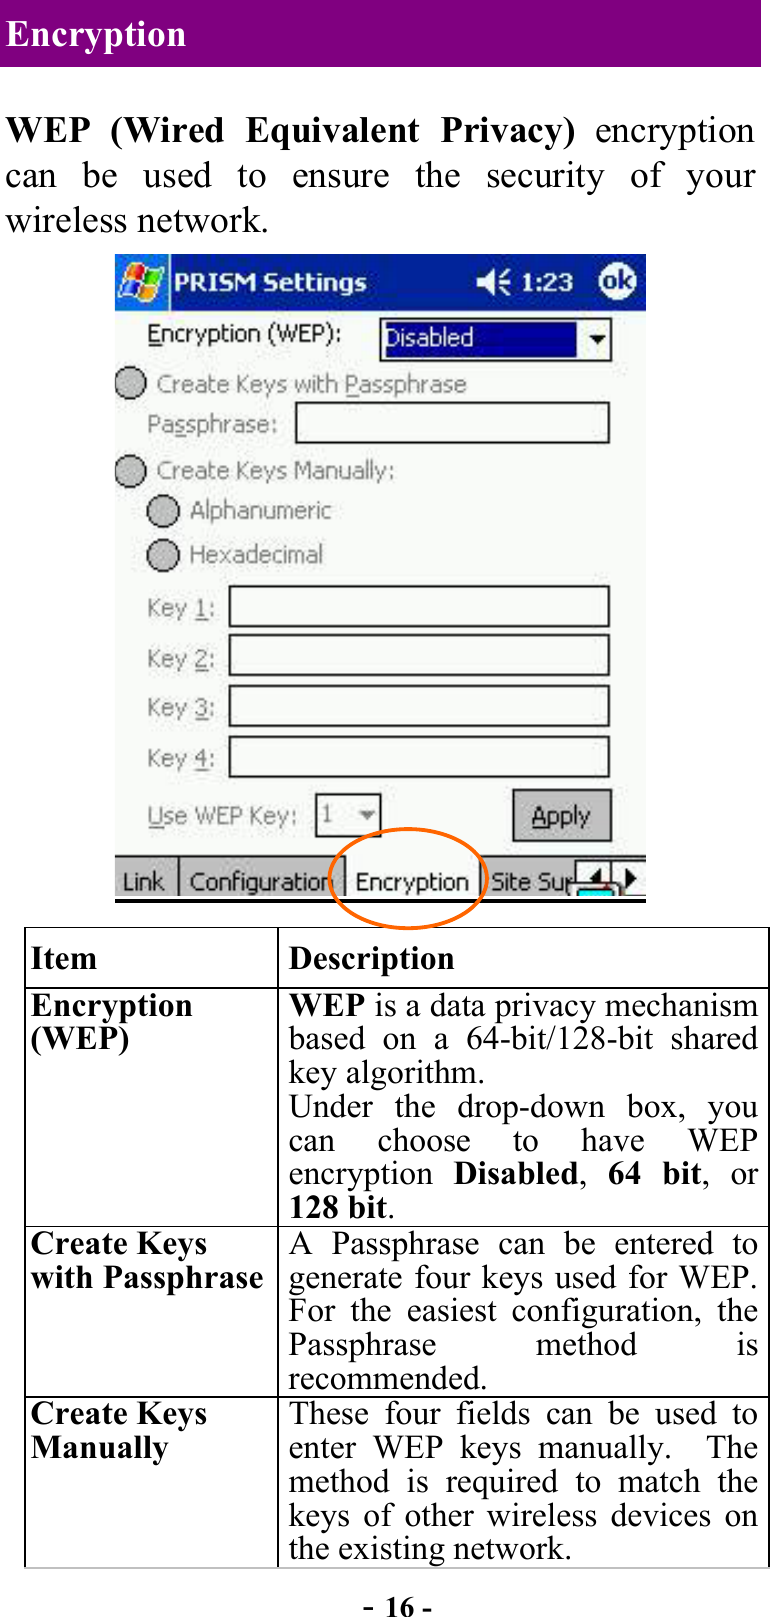  - 16 - Encryption WEP (Wired Equivalent Privacy) encryption can be used to ensure the security of your wireless network.   Item Description Encryption (WEP) WEP is a data privacy mechanism based on a 64-bit/128-bit shared key algorithm. Under the drop-down box, you can choose to have WEP encryption  Disabled,  64 bit, or 128 bit. Create Keys with Passphrase A Passphrase can be entered to generate four keys used for WEP. For the easiest configuration, the Passphrase method is recommended. Create Keys Manually These four fields can be used to enter WEP keys manually.  The method is required to match the keys of other wireless devices on the existing network. 